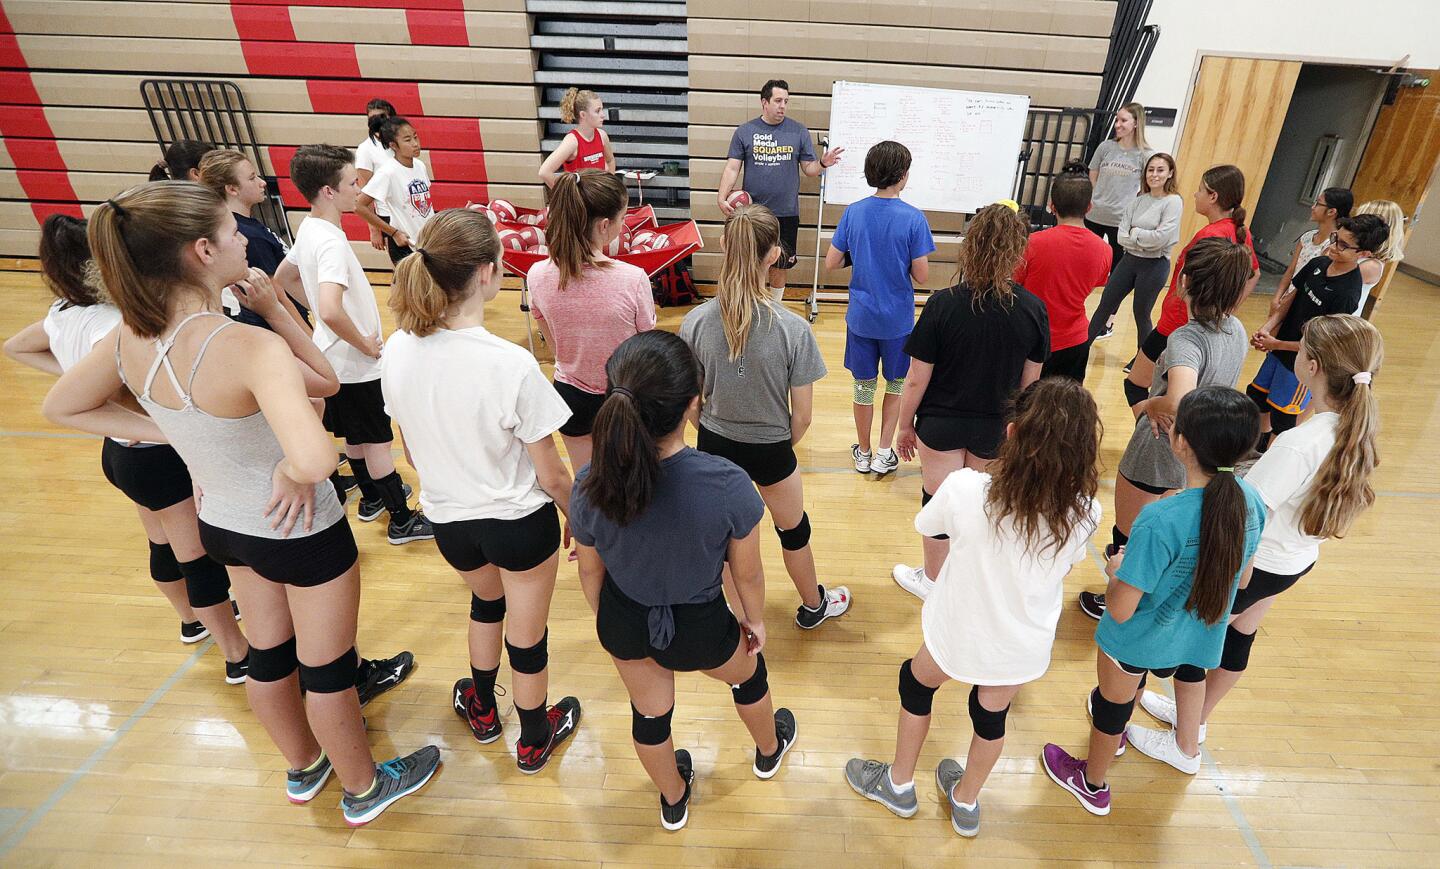 Photo Gallery: Volleyball camp at Burroughs High School